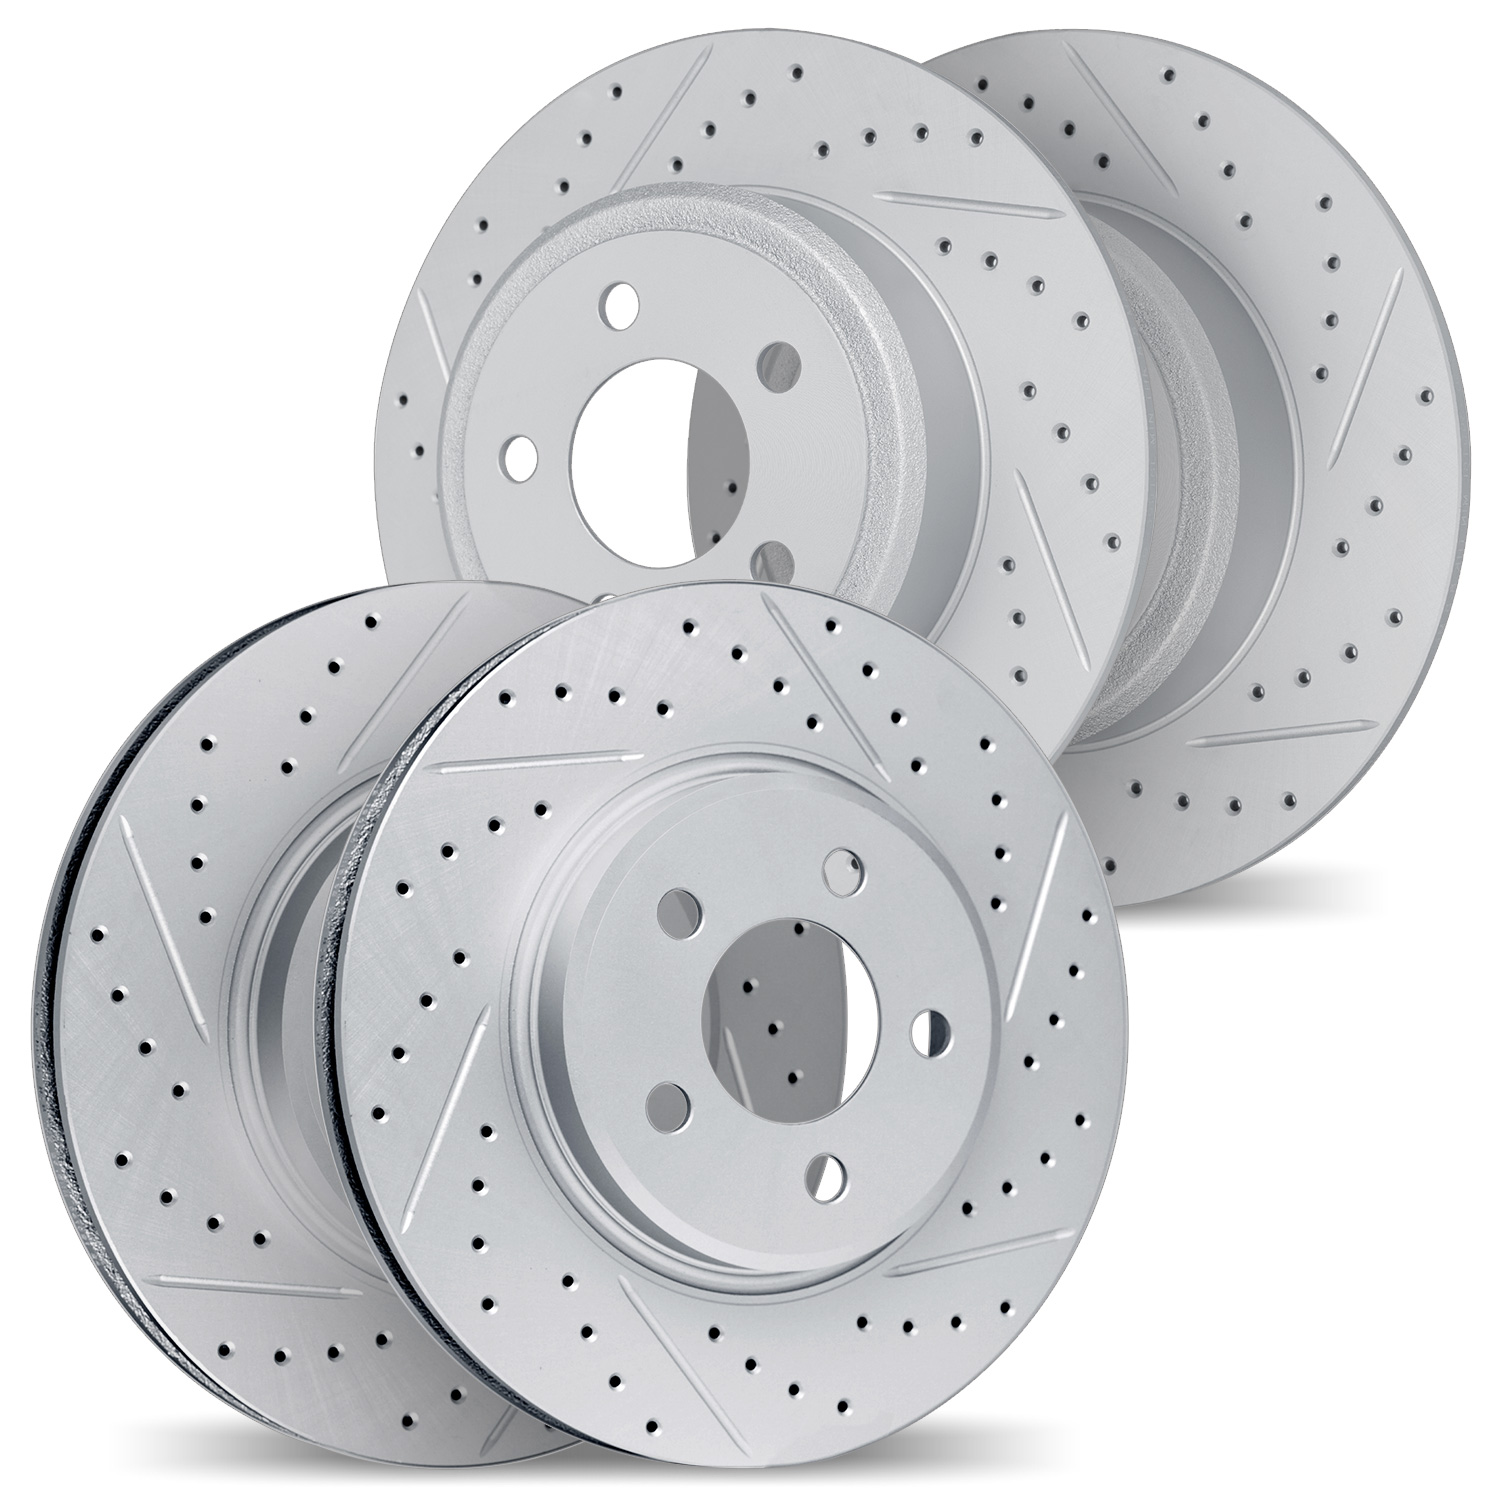 2004-31074 Geoperformance Drilled/Slotted Brake Rotors, 2003-2006 BMW, Position: Front and Rear